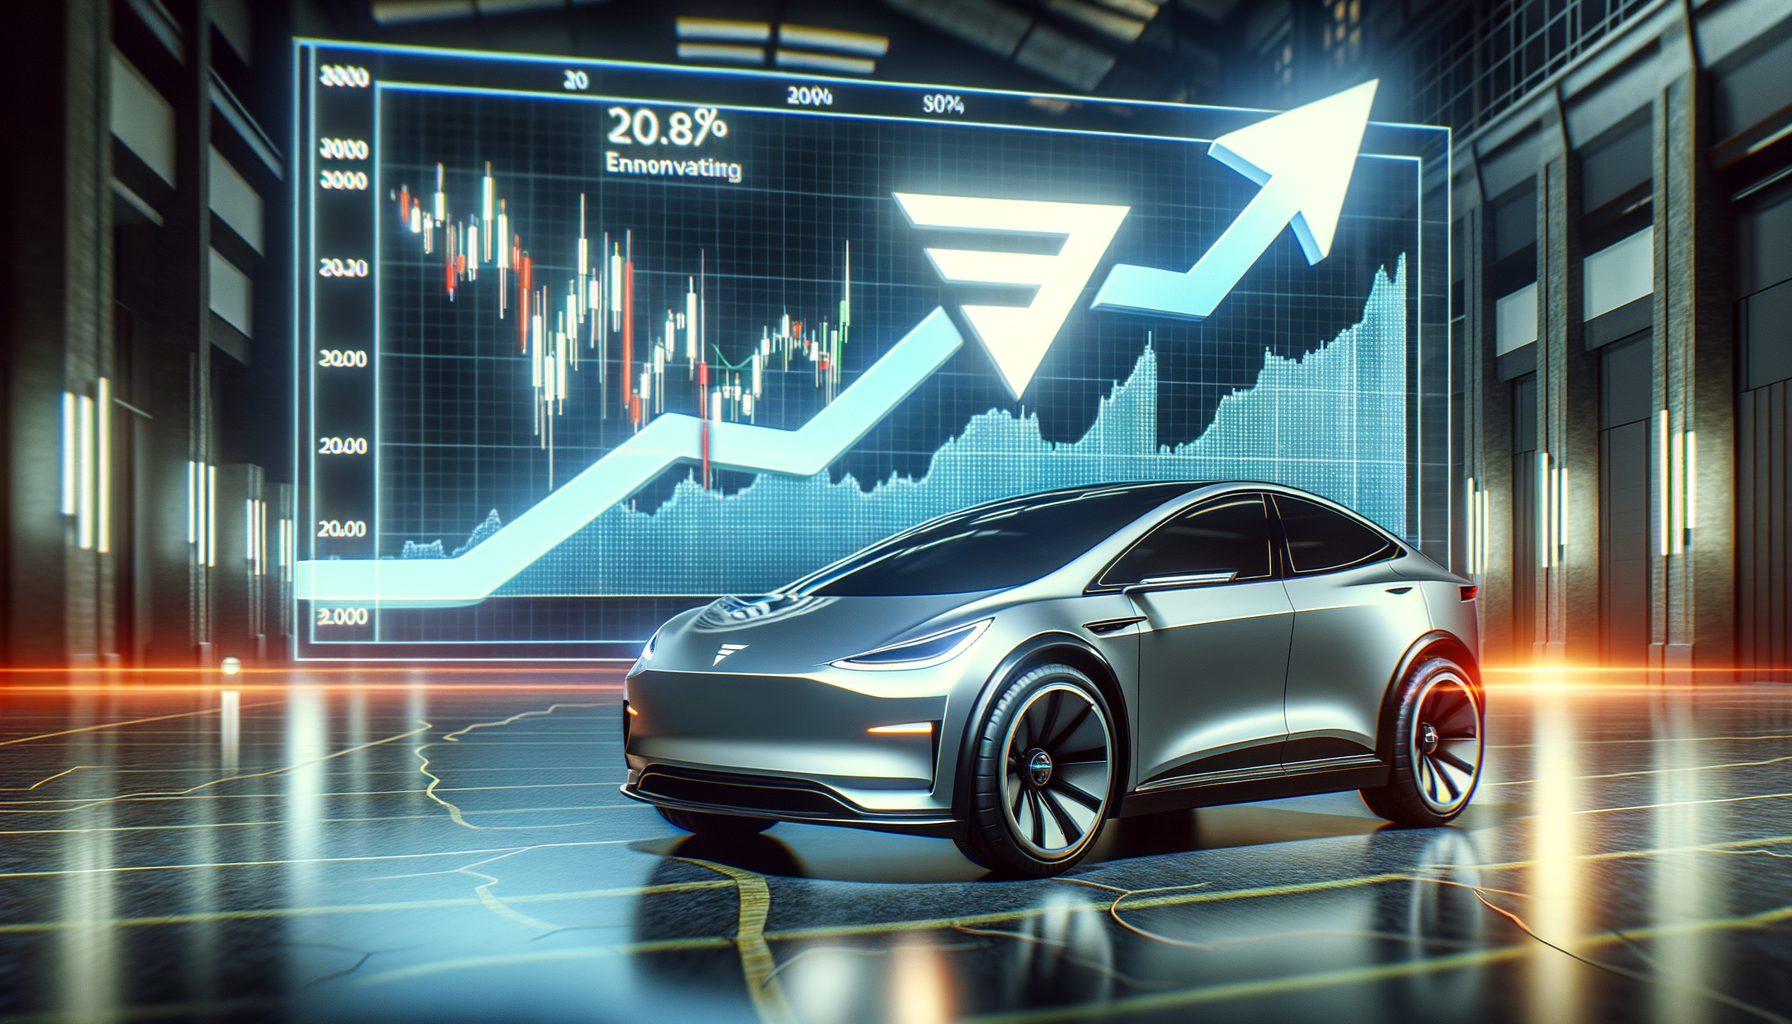 Tesla, Inc. (TSLA) Analysis & Performance Review: A Cautious Outlook for Investors